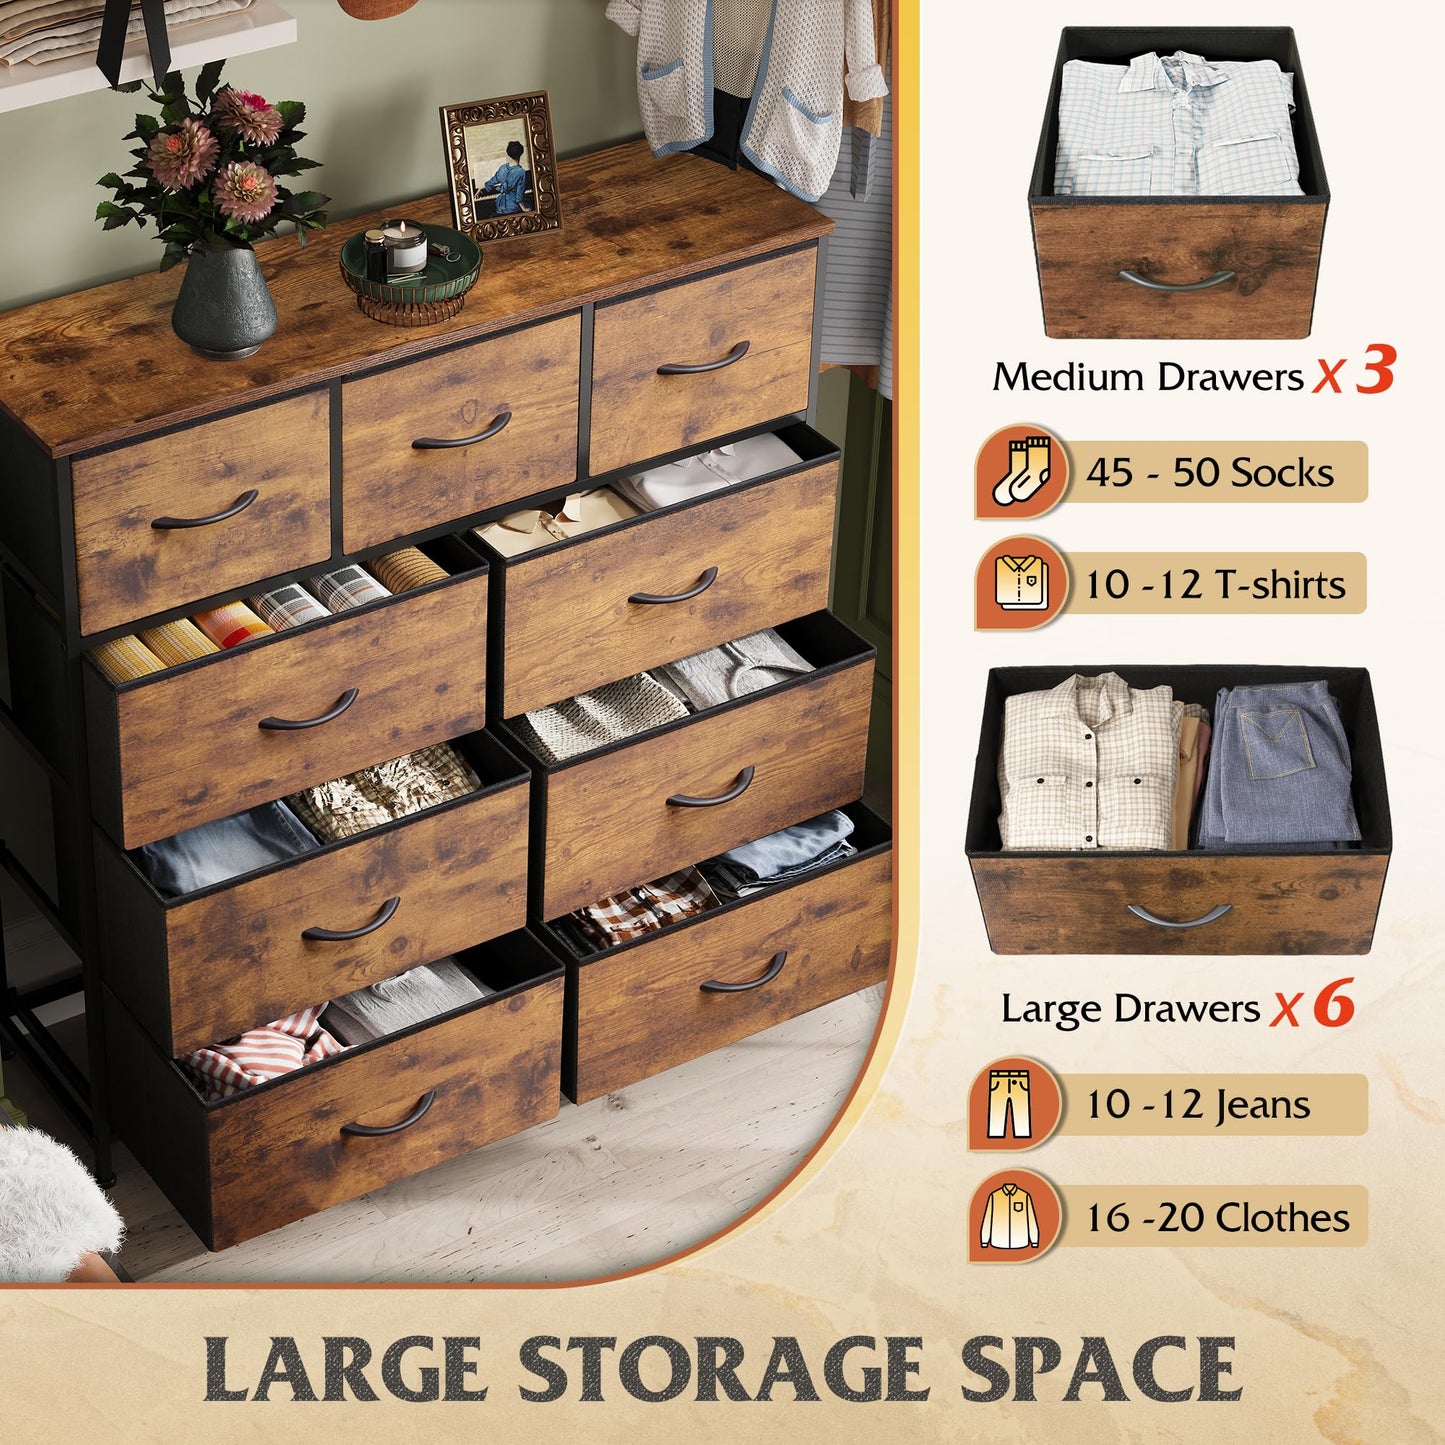 WLIVE 9-Drawer Dresser, Fabric Storage Tower for Bedroom, Hallway, Closet, Tall Chest Organizer Unit with Fabric Bins, Steel Frame, Wood Top, Easy